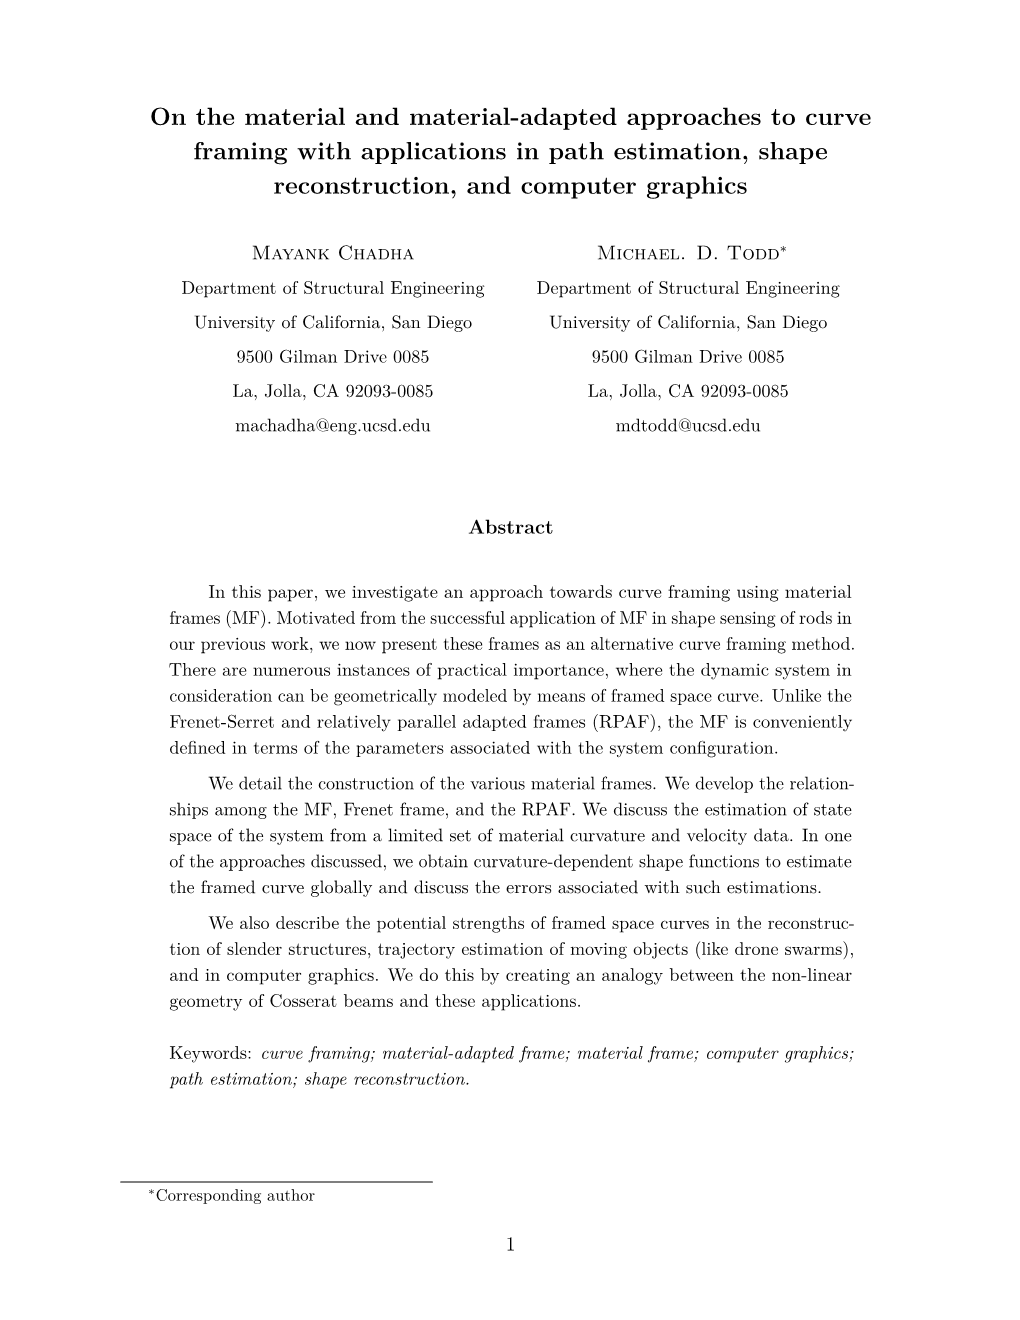 On the Material and Material-Adapted Approaches to Curve Framing with Applications in Path Estimation, Shape Reconstruction, and Computer Graphics